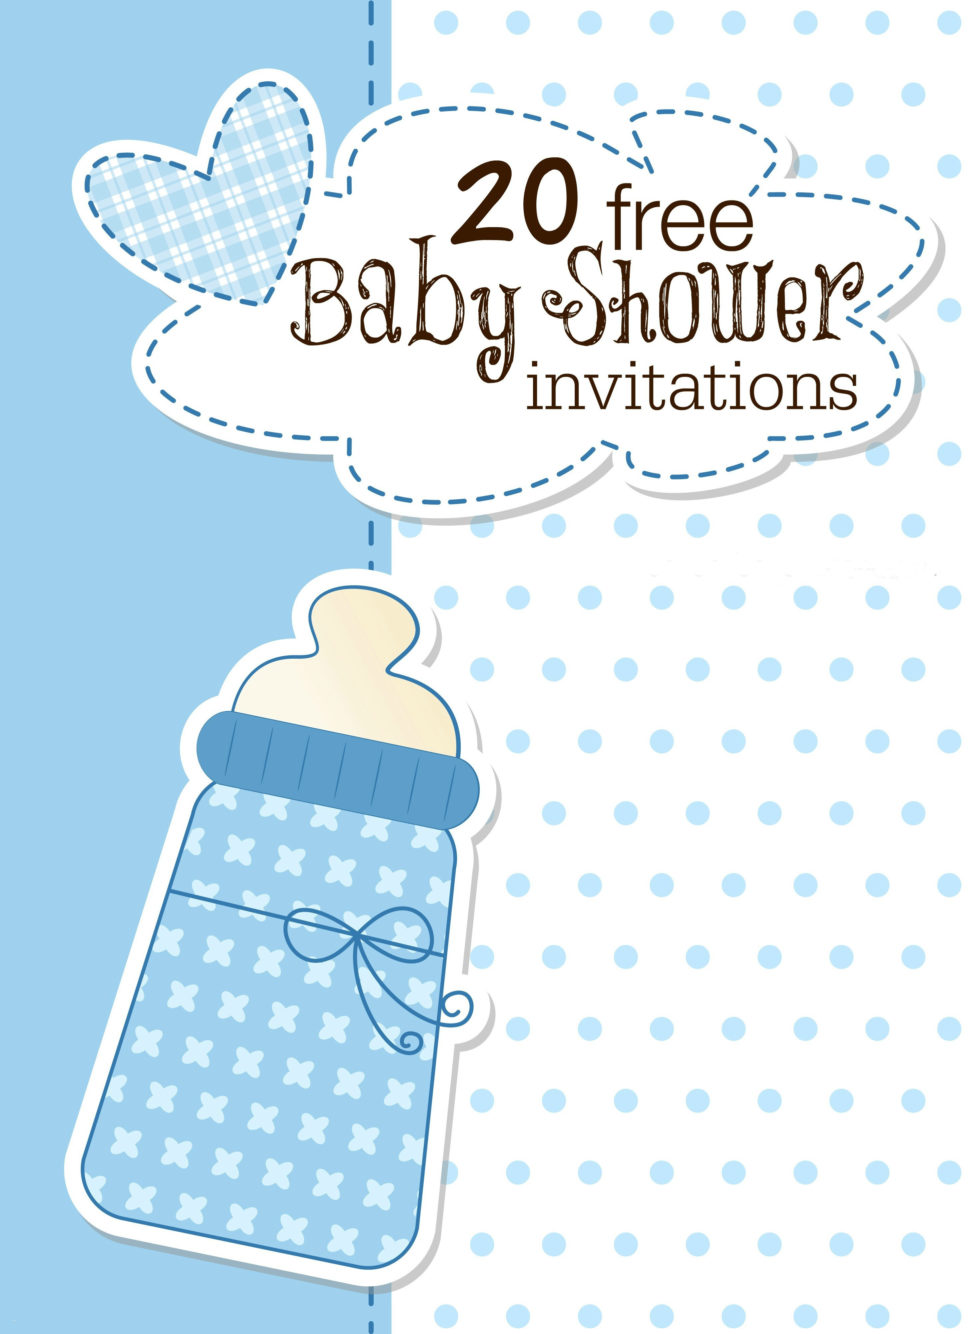 Medium Size of Baby Shower:sturdy Baby Shower Invitation Template Image Concepts Baby Shower Invitation Template Digital Baby Shower Invitation Templates Valid Digital Baby Shower Invitation Templates Lovely Baby Shower Postcard